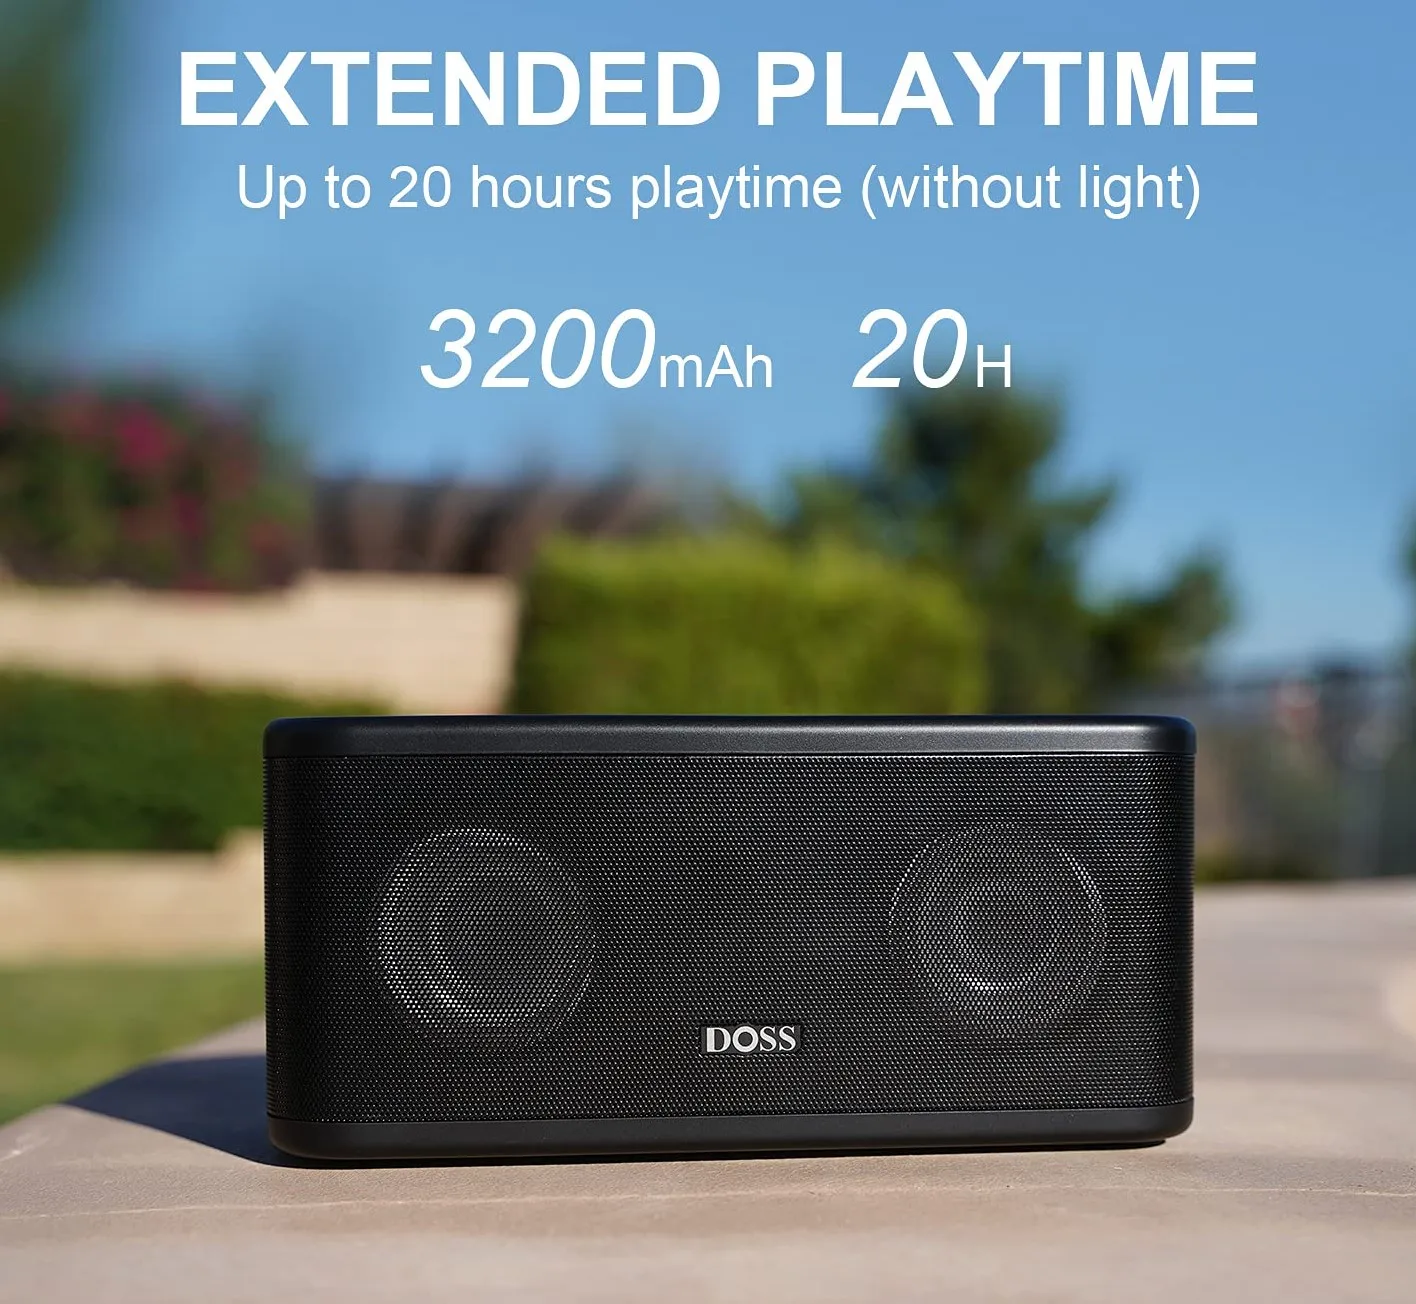 New DOSS SoundBox Plus Portable Wireless Bluetooth Speaker, HD Sound and Deep Bass, Wireless Stereo Pairing, 20 Hours Playtime